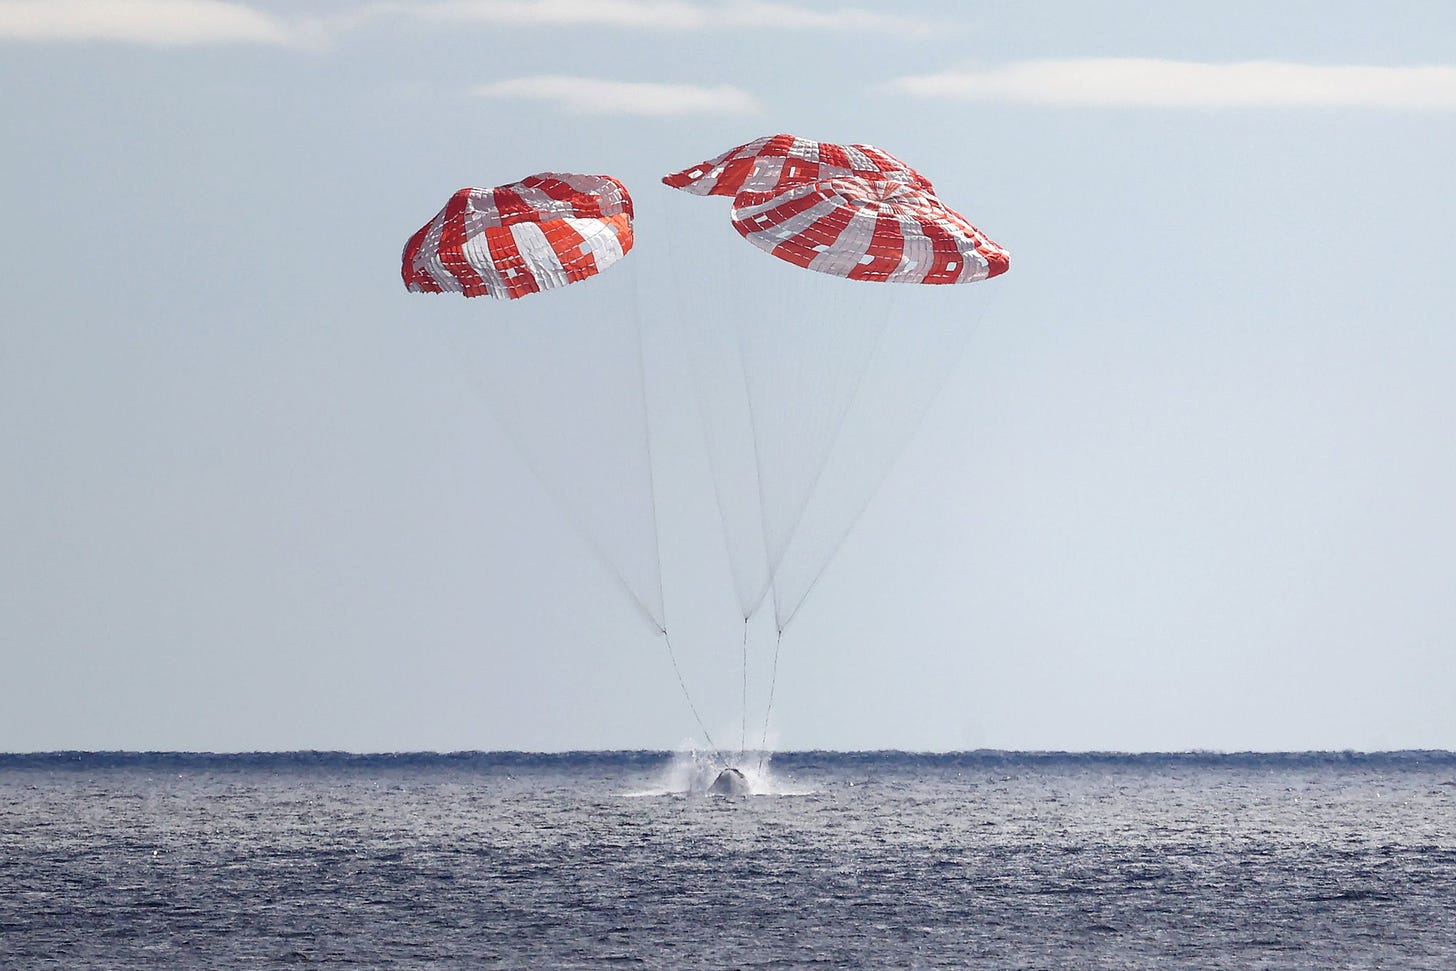 NASA’s Orion Capsule Splashes Down In The Pacific After Successful Uncrewed Artemis I Moon Mission